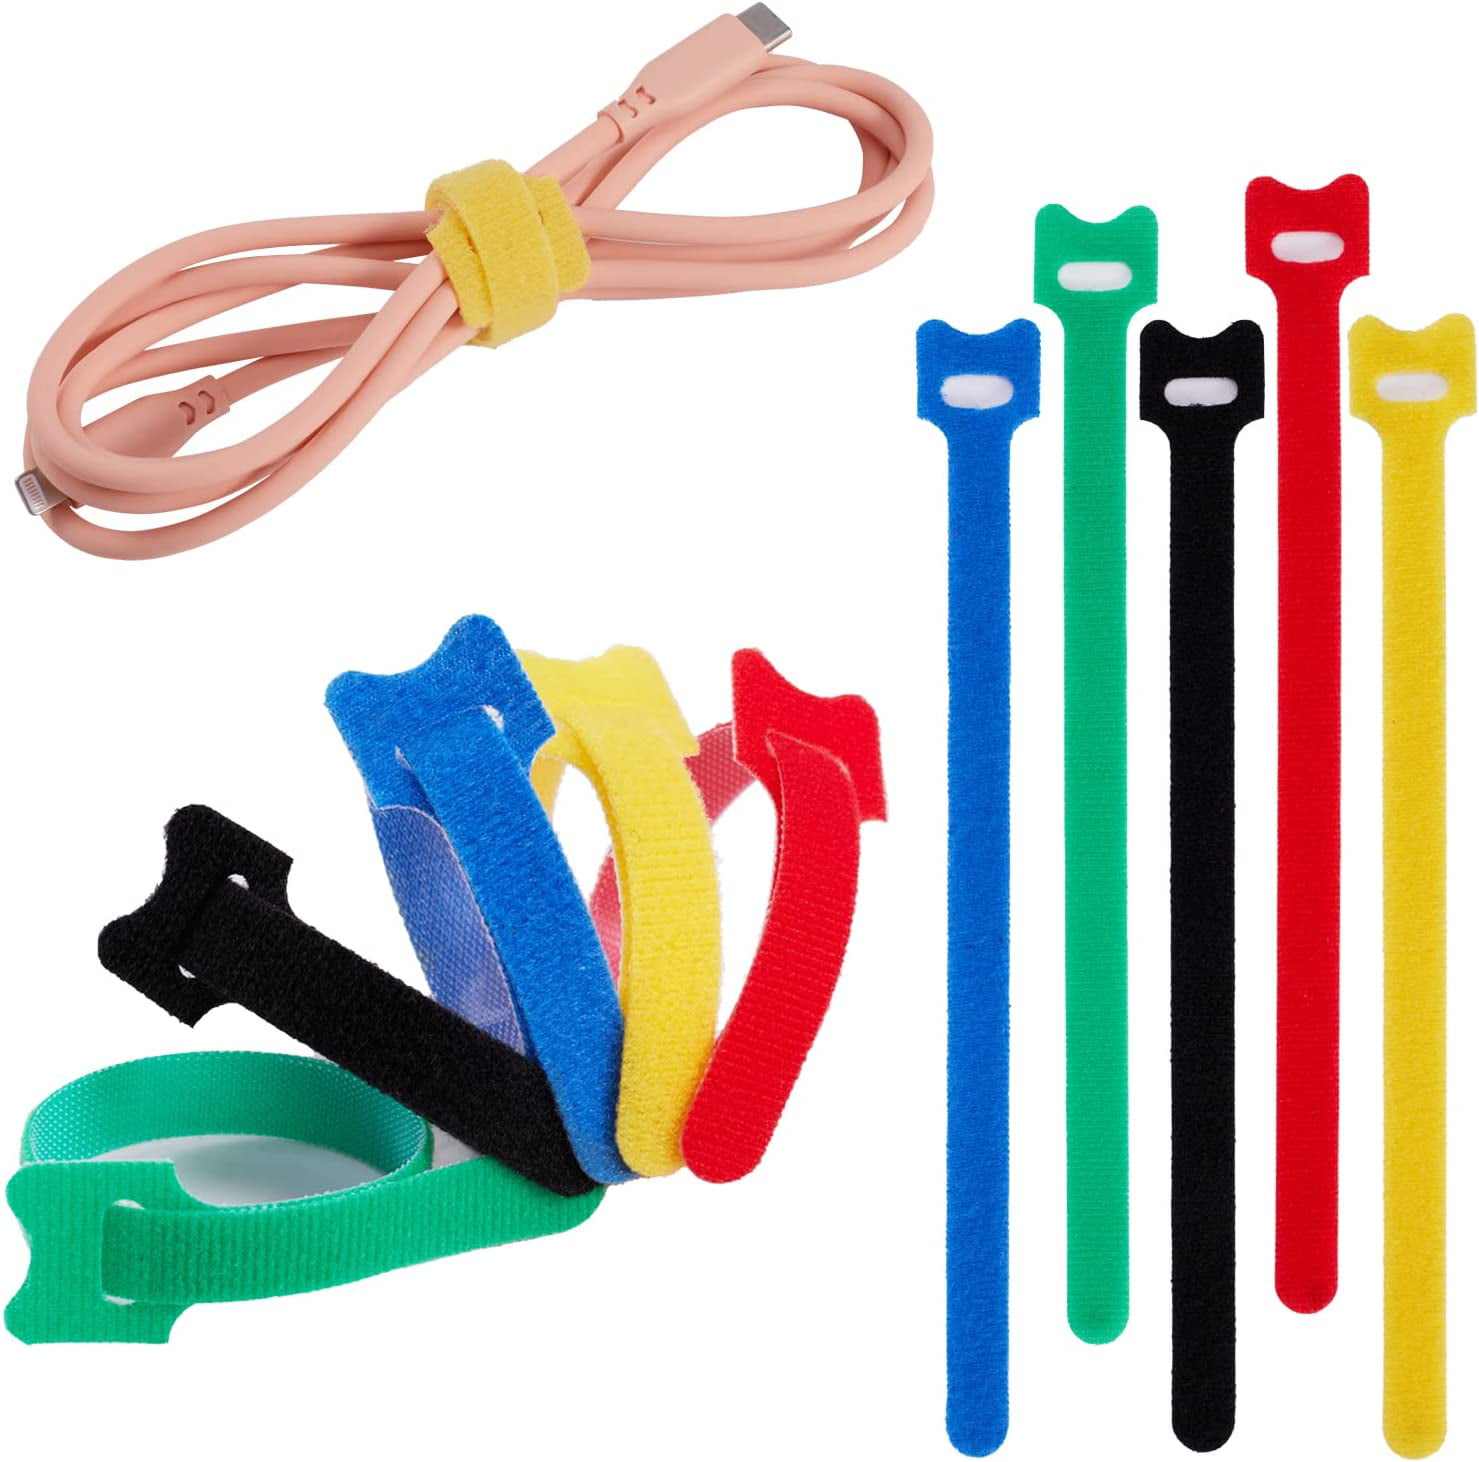 Reusable Fastening Cable Ties 50PCS, Adjustable Adhesive Extension